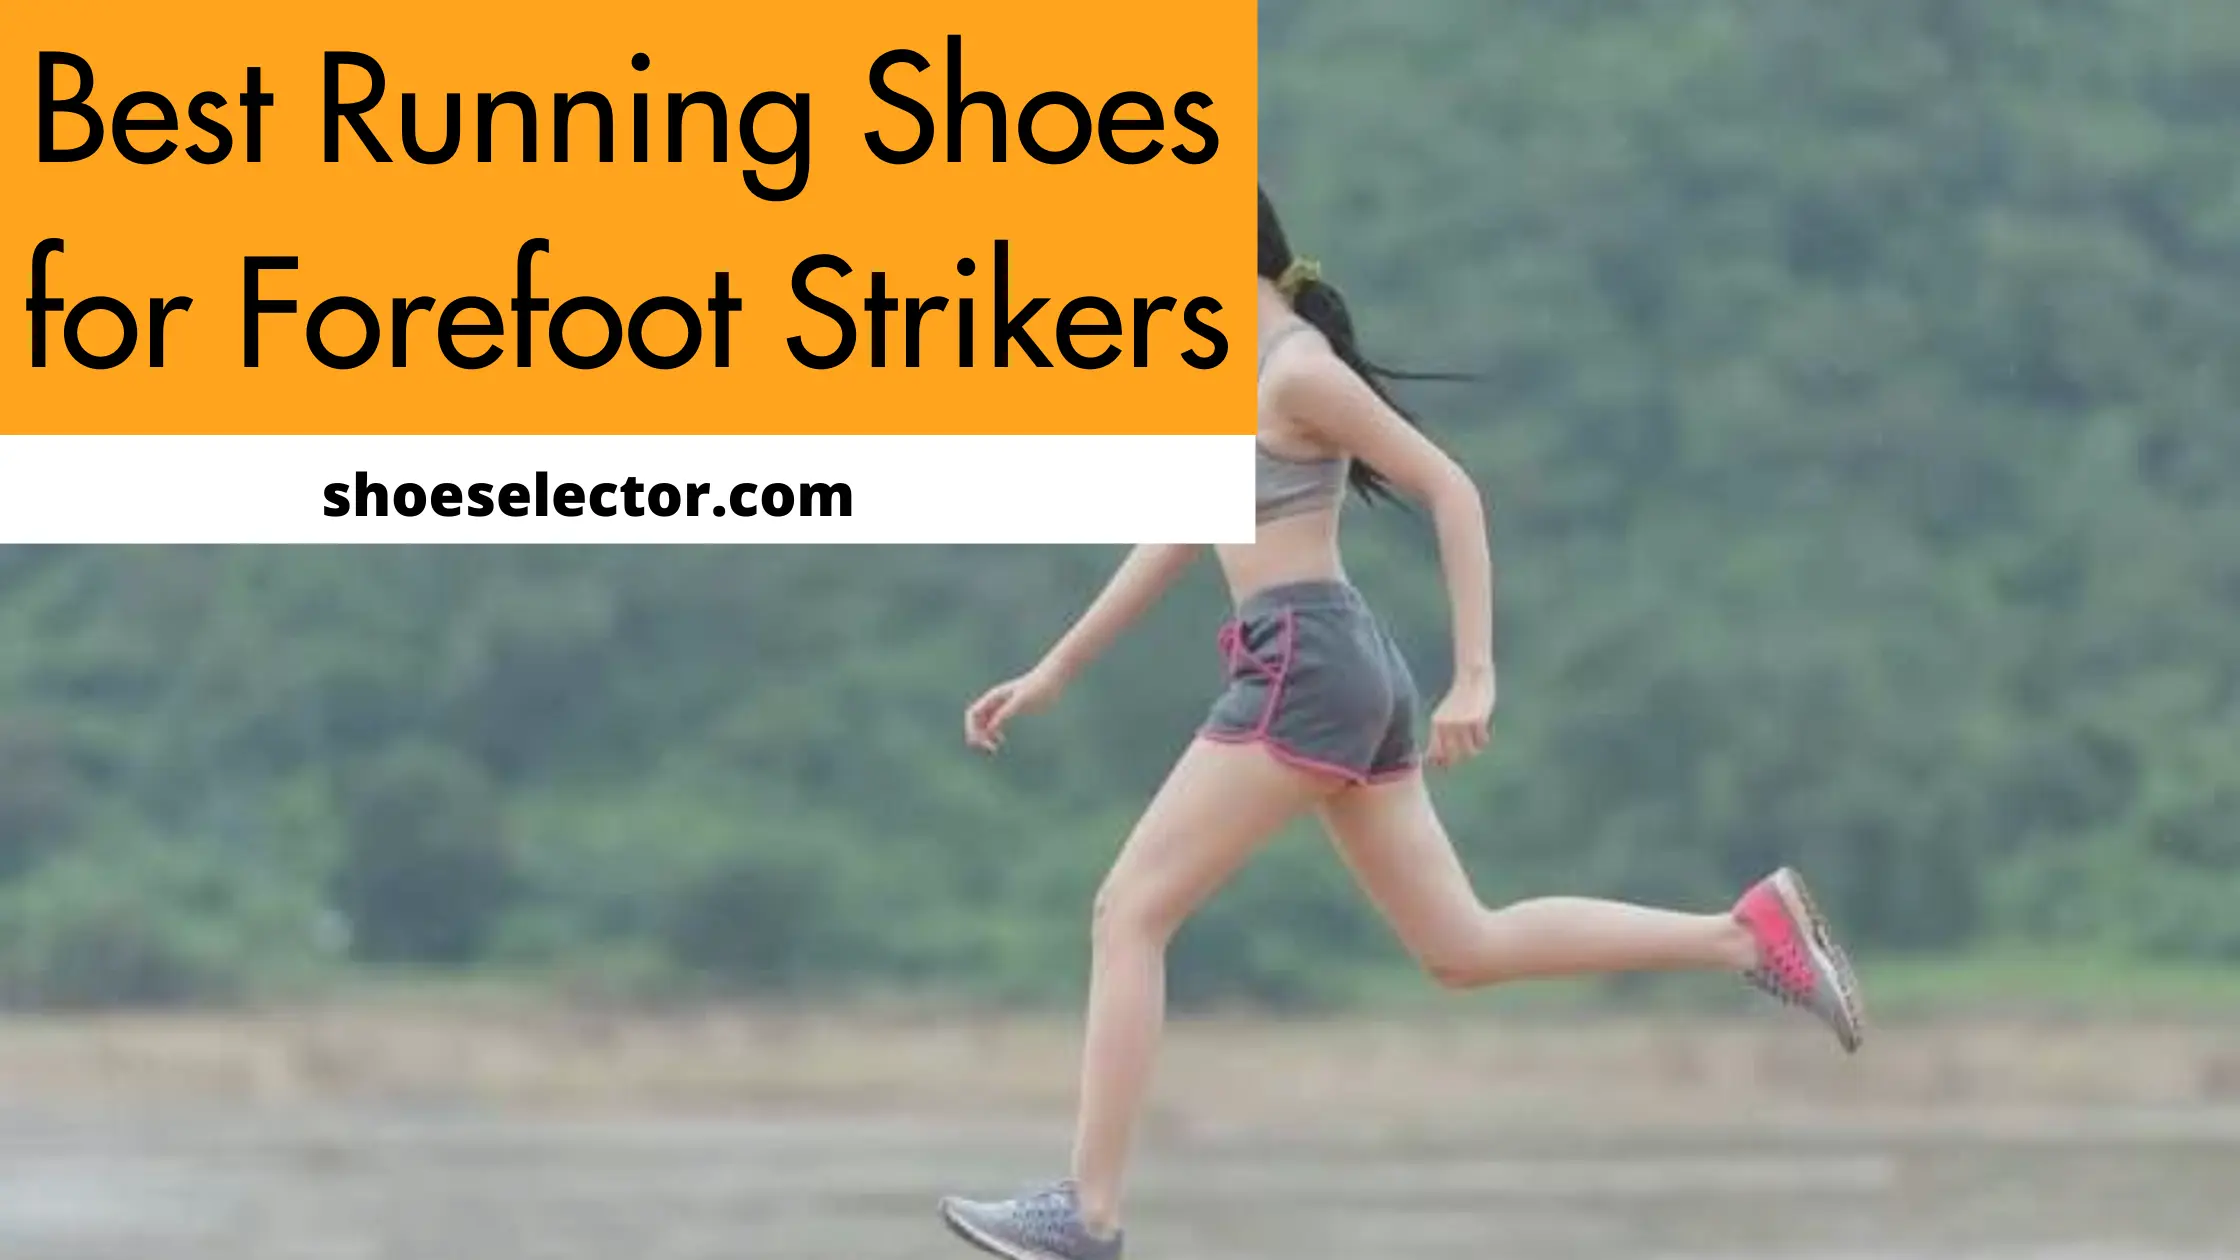 Best Running Shoes For Forefoot Strikers - Latest Guide